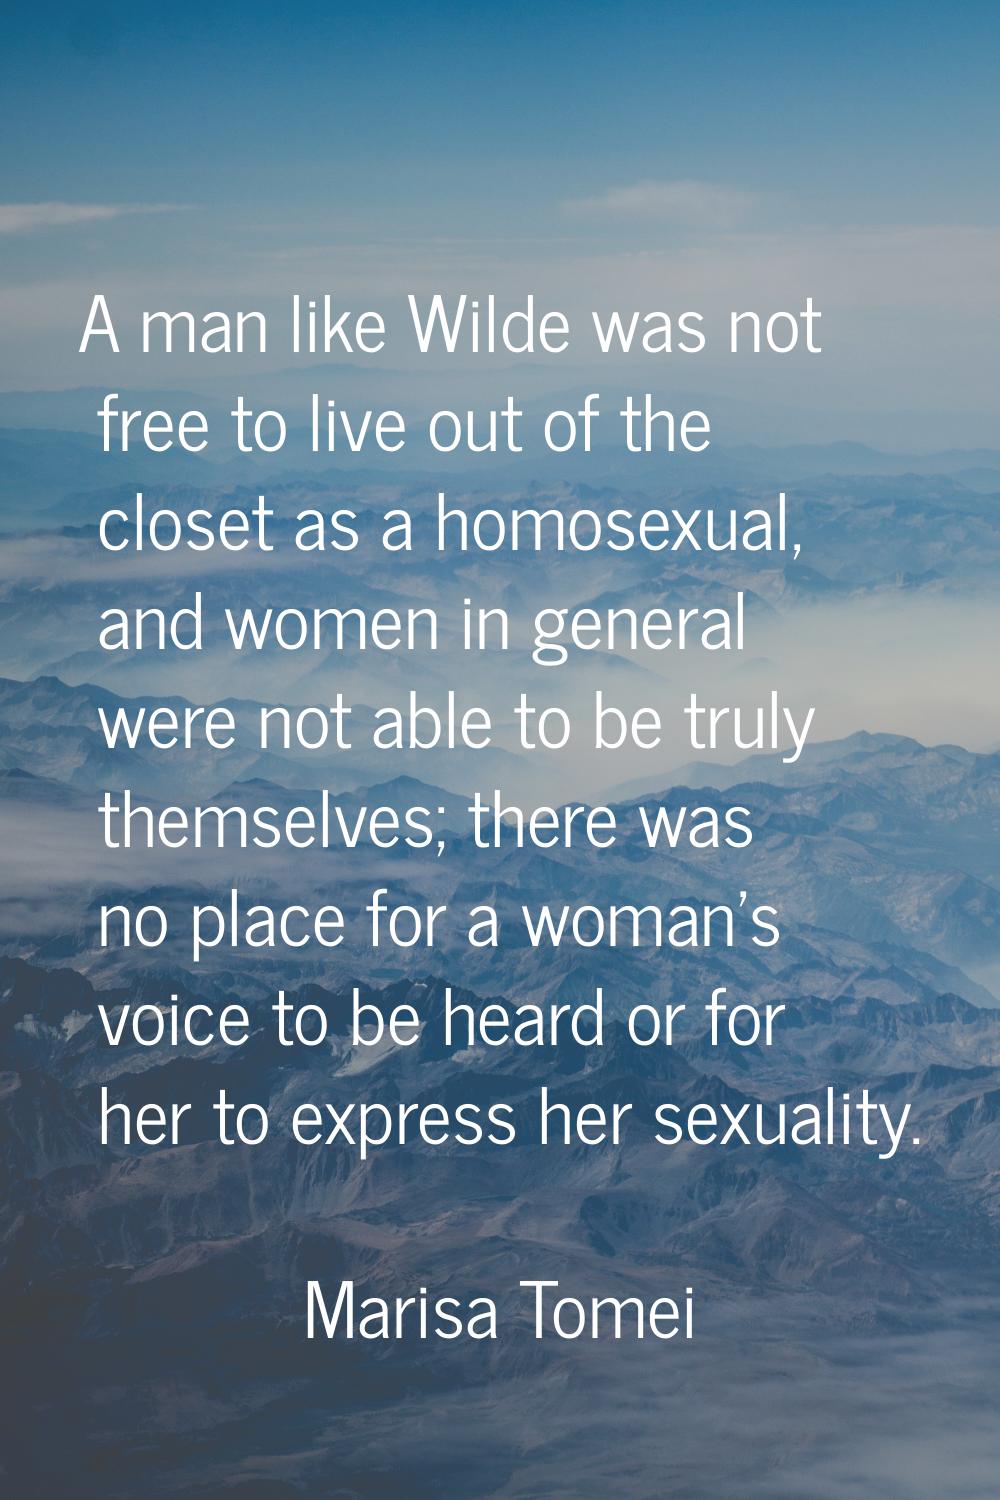 A man like Wilde was not free to live out of the closet as a homosexual, and women in general were 